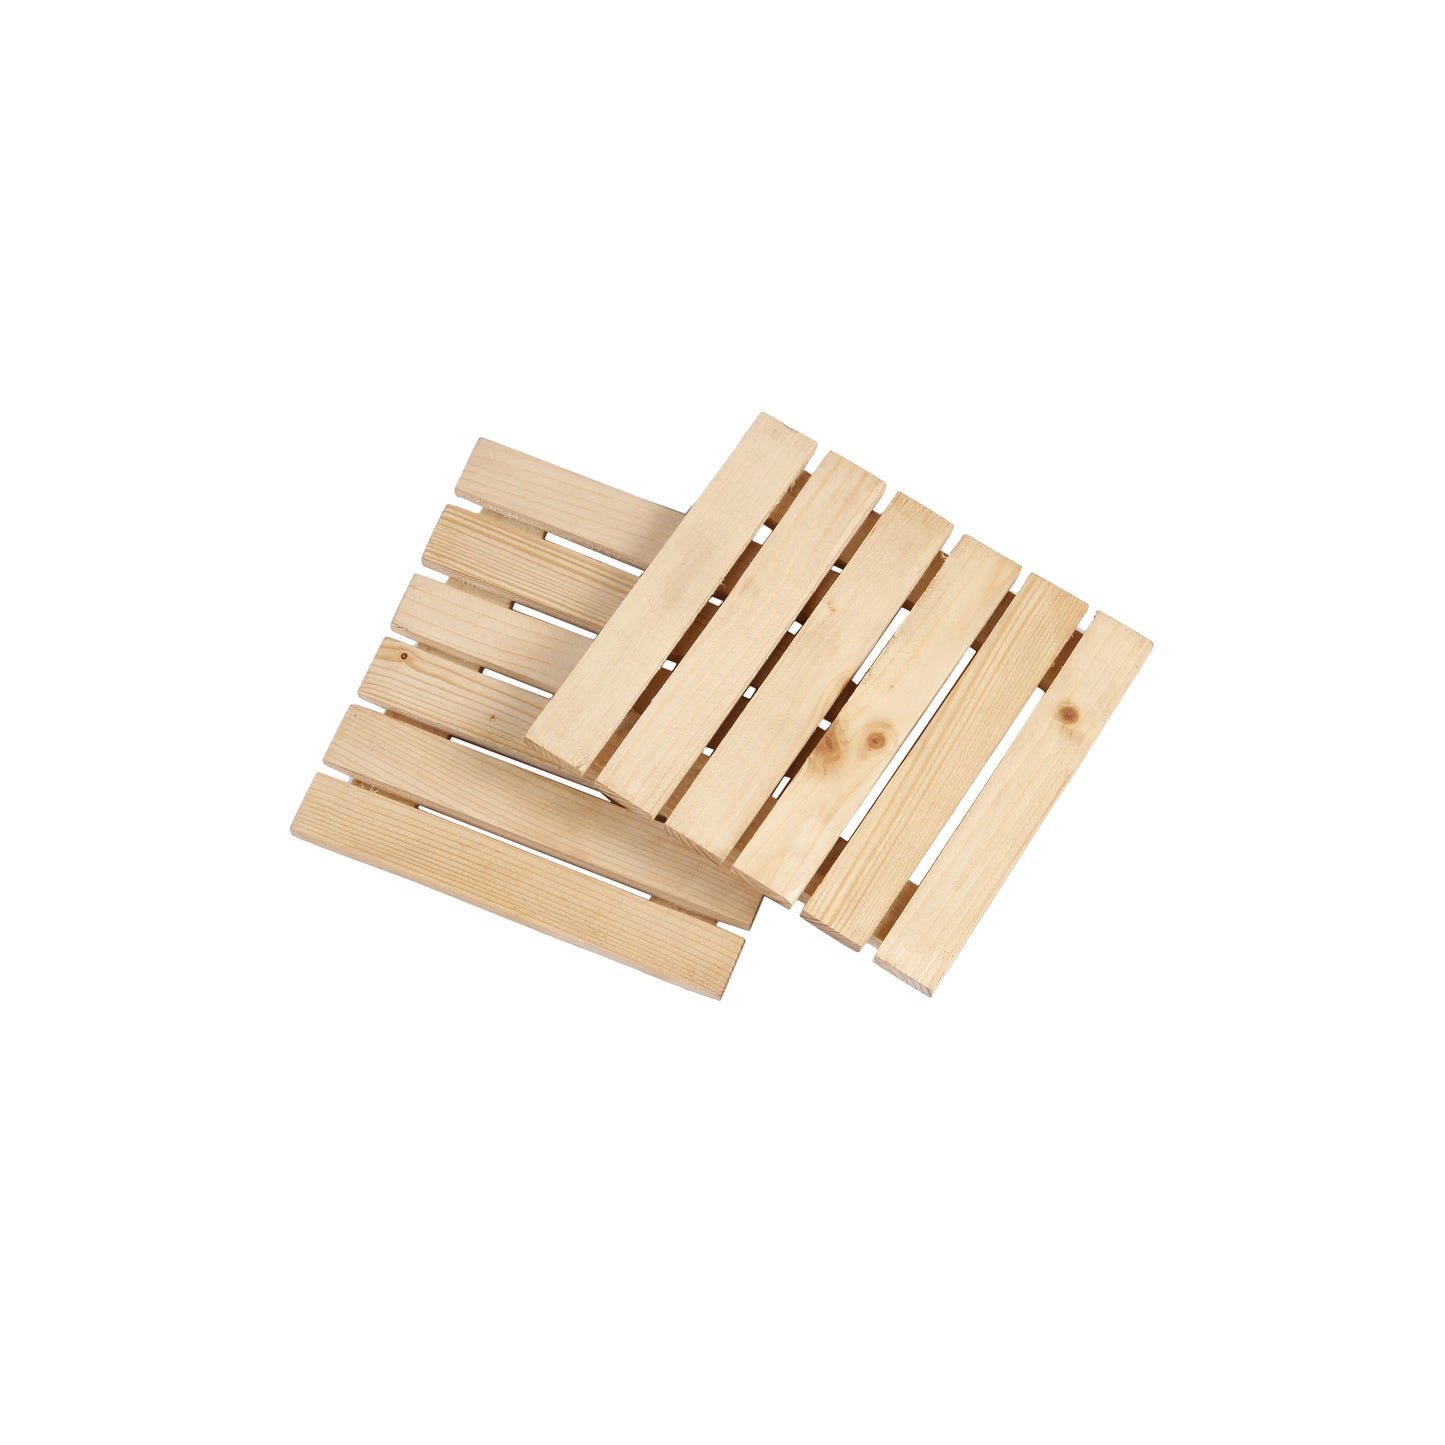 A Tiny Mistake Pine Wood Trivets, Place Mats, Table Accessory, Serveware, Set of 2 Trivets, Coasters for The Table, 15.9 x 15.3 x 1.5 cm (Natural)